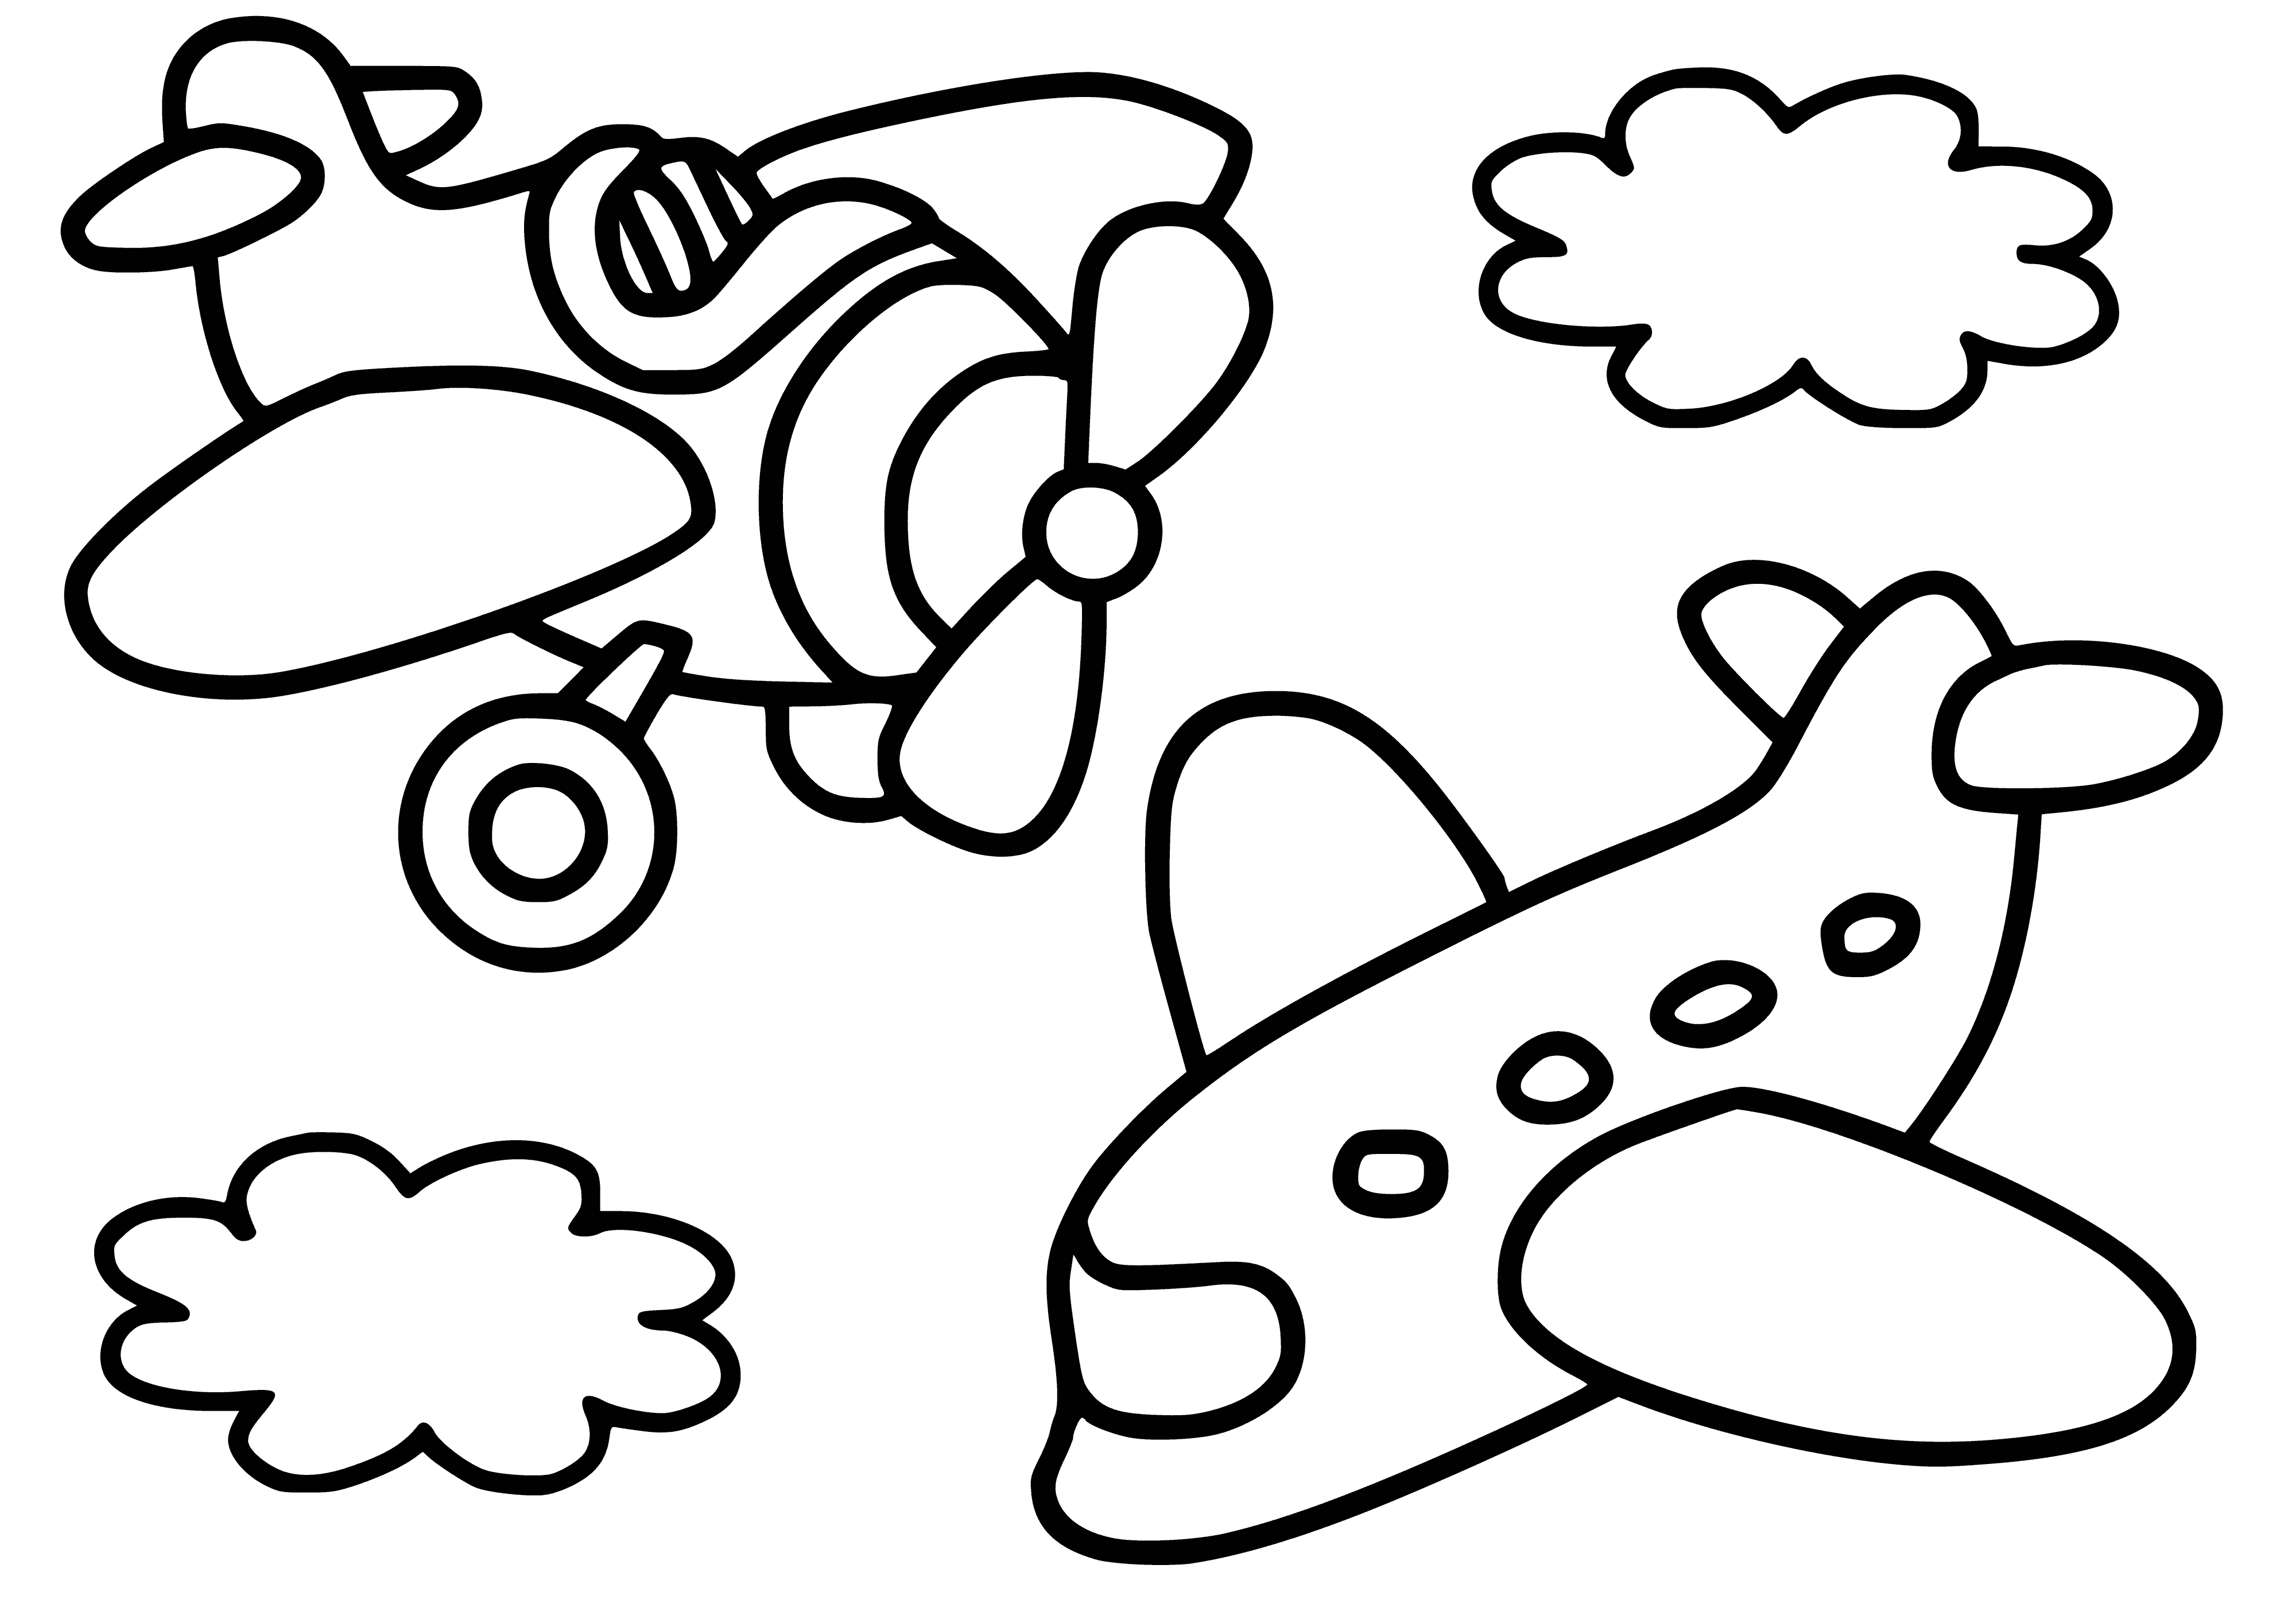 coloring page: Airplanes come in many shapes & sizes. Most have long bodies & wings, many with 1 or multiple engines. Coloring pages show various planes in different settings, such as taking off from a field or flying high with clouds. #avgeek